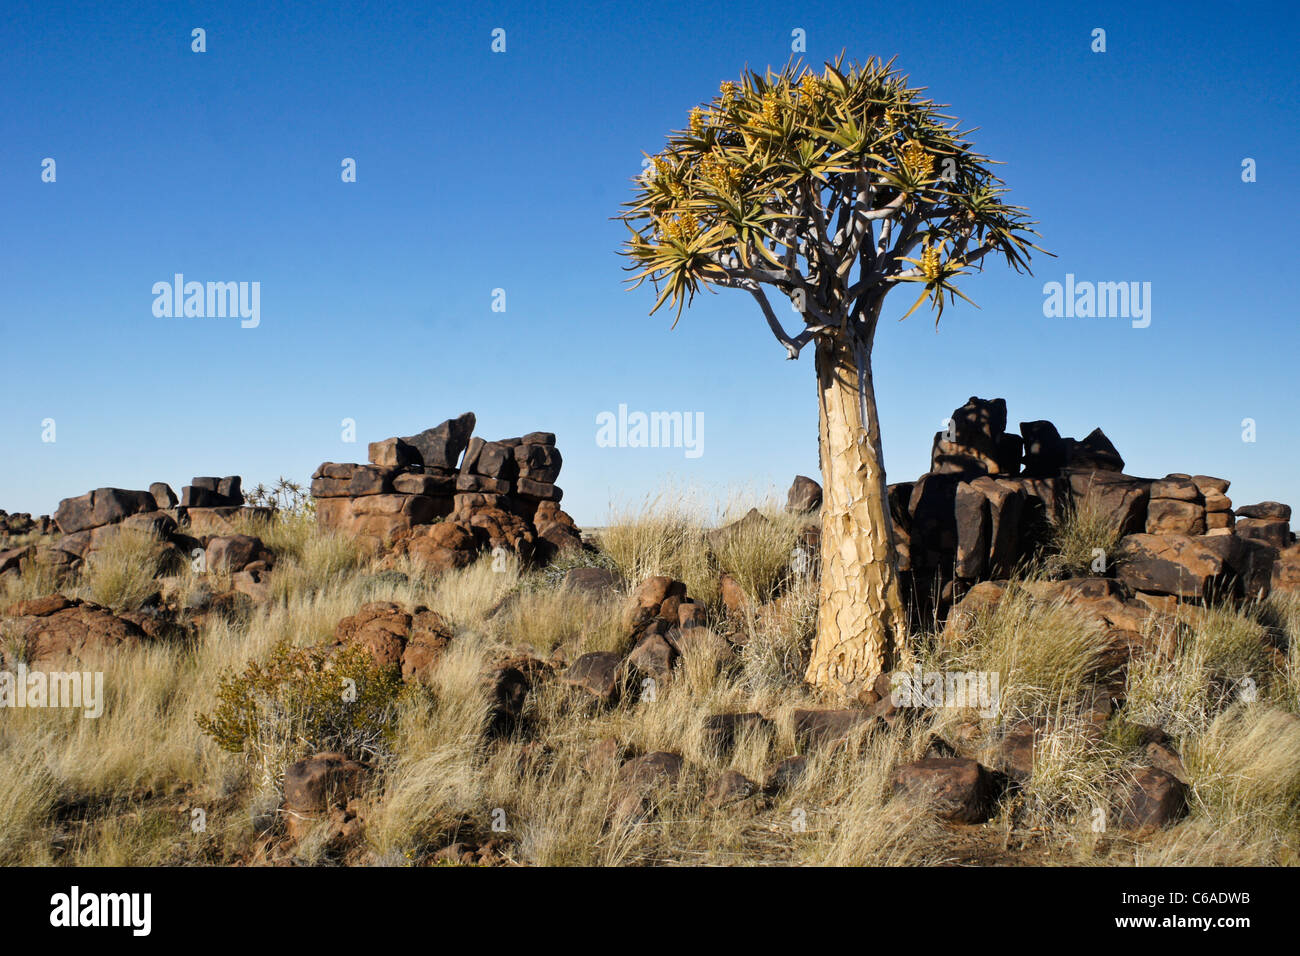 Quivertree in bloom, Giants' Playground, Namibia Stock Photo